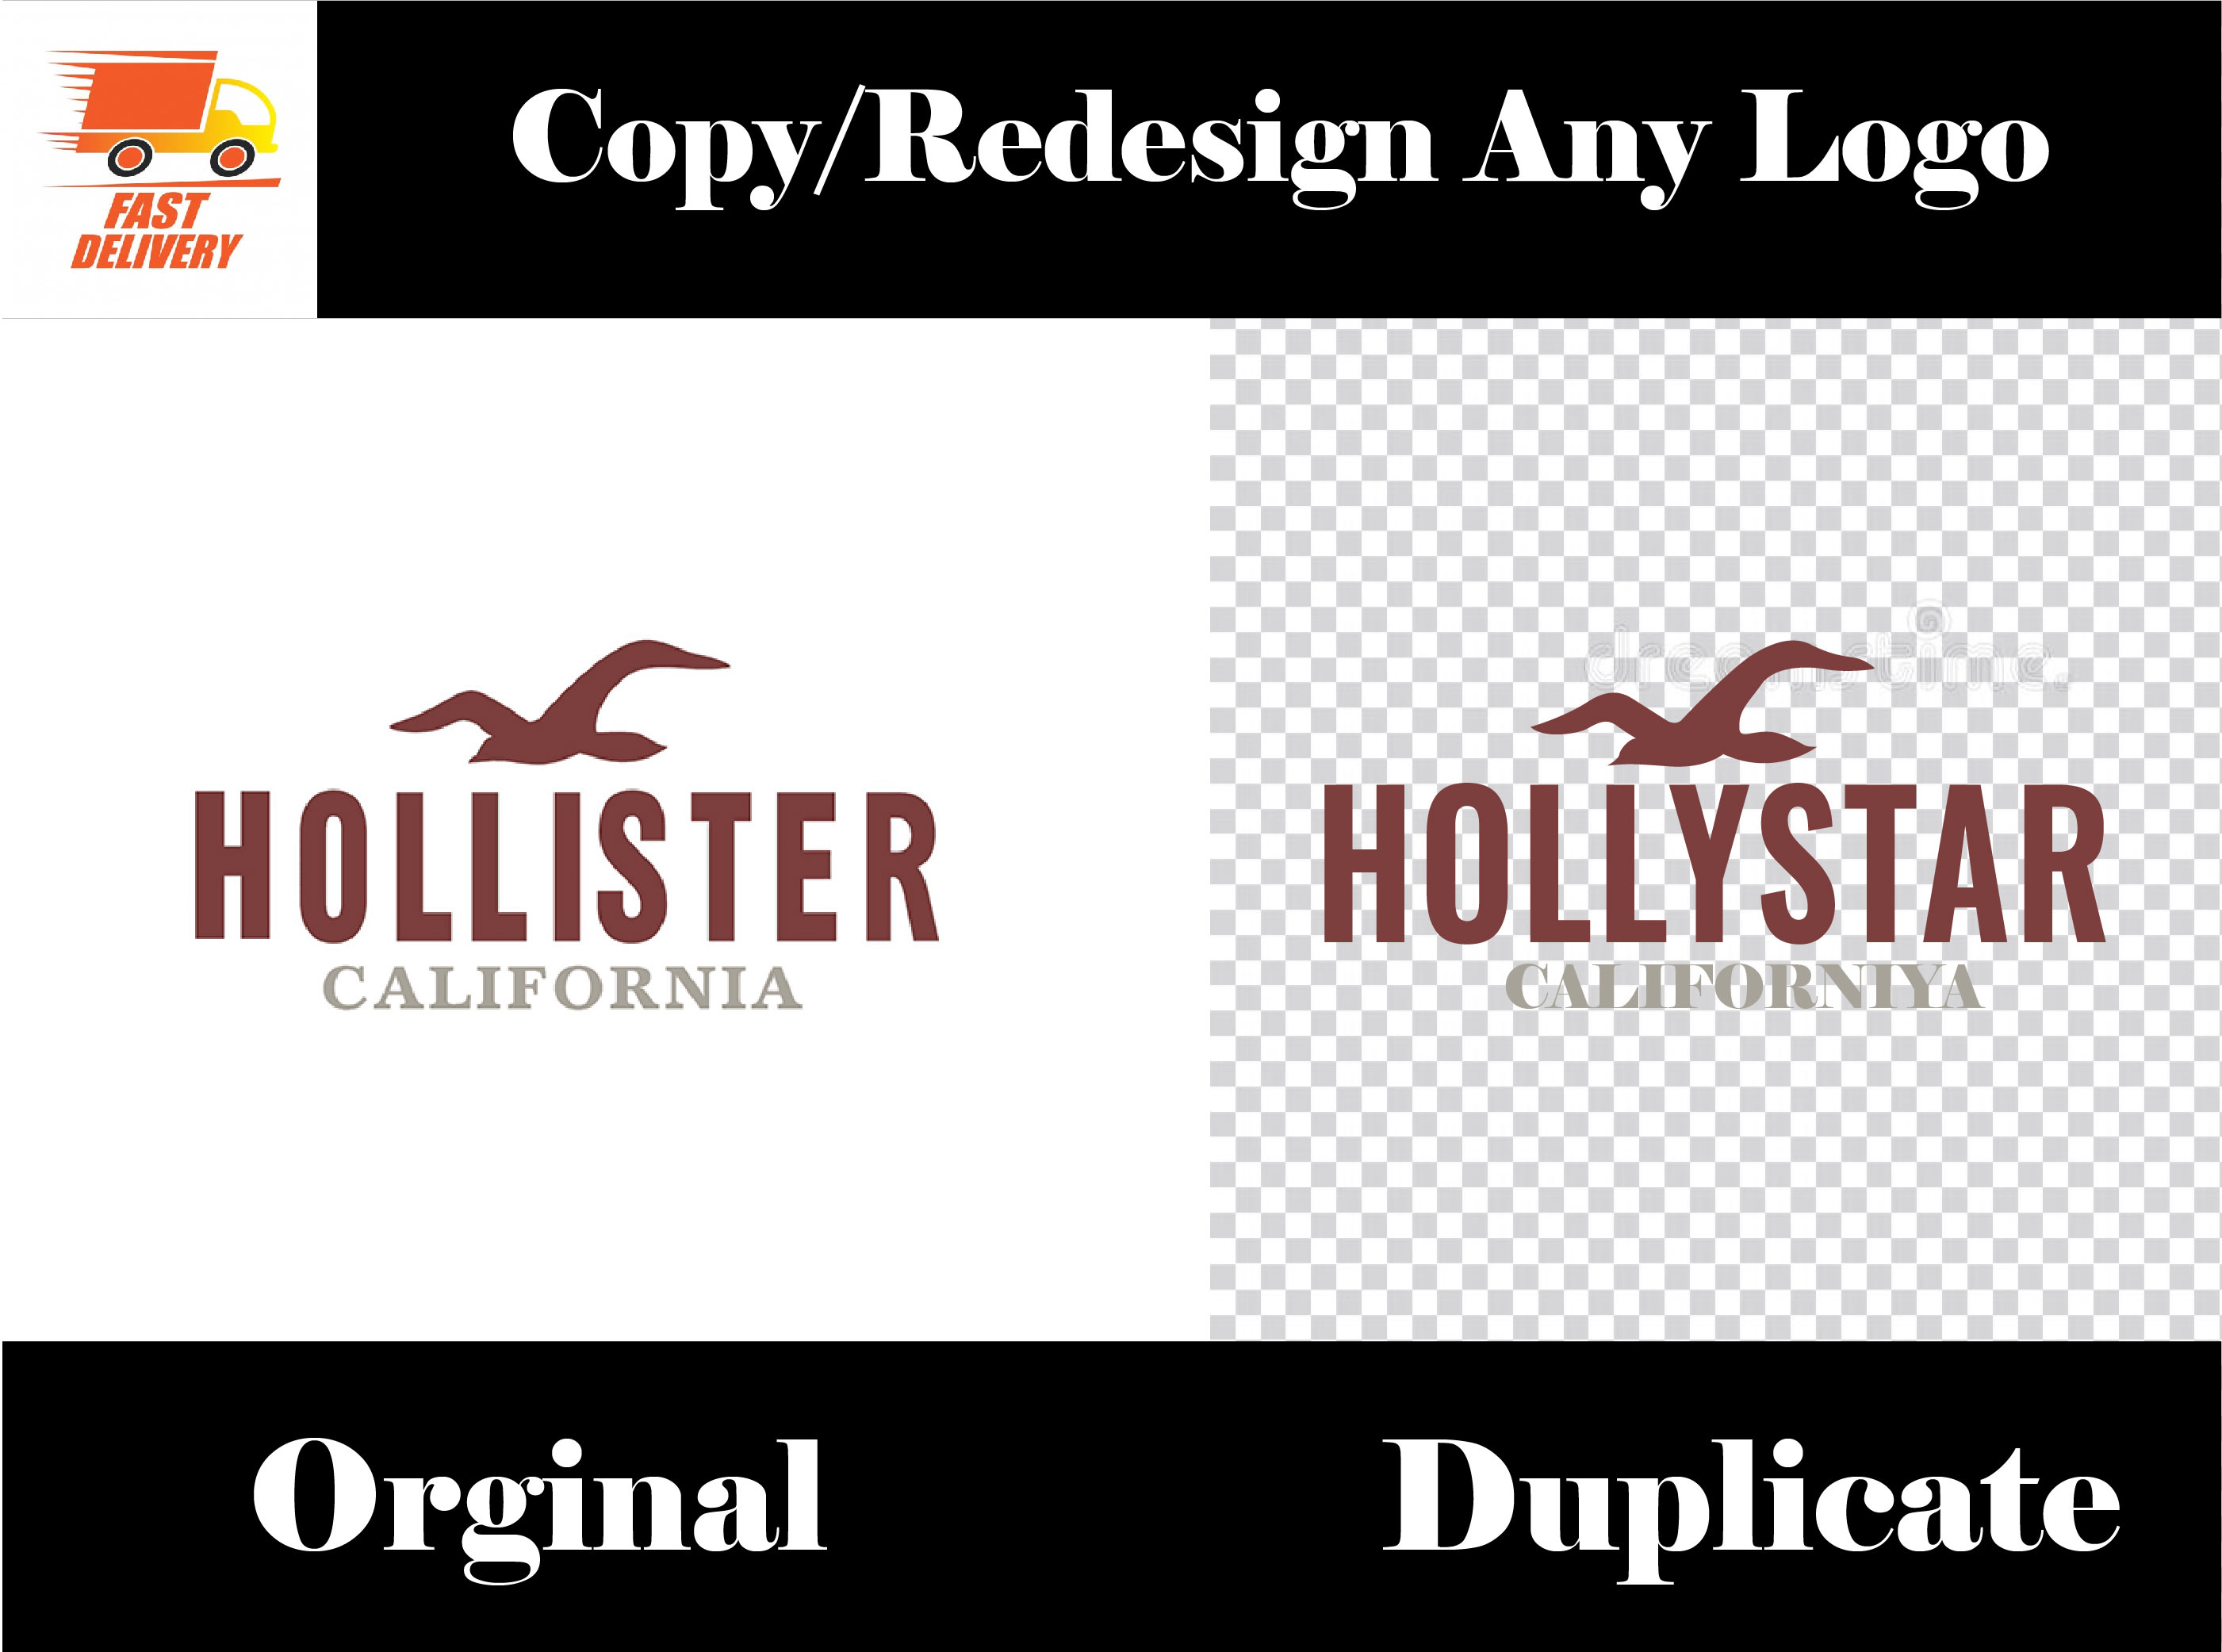 Hollister California Logo PNG Vector (EPS) Free Download